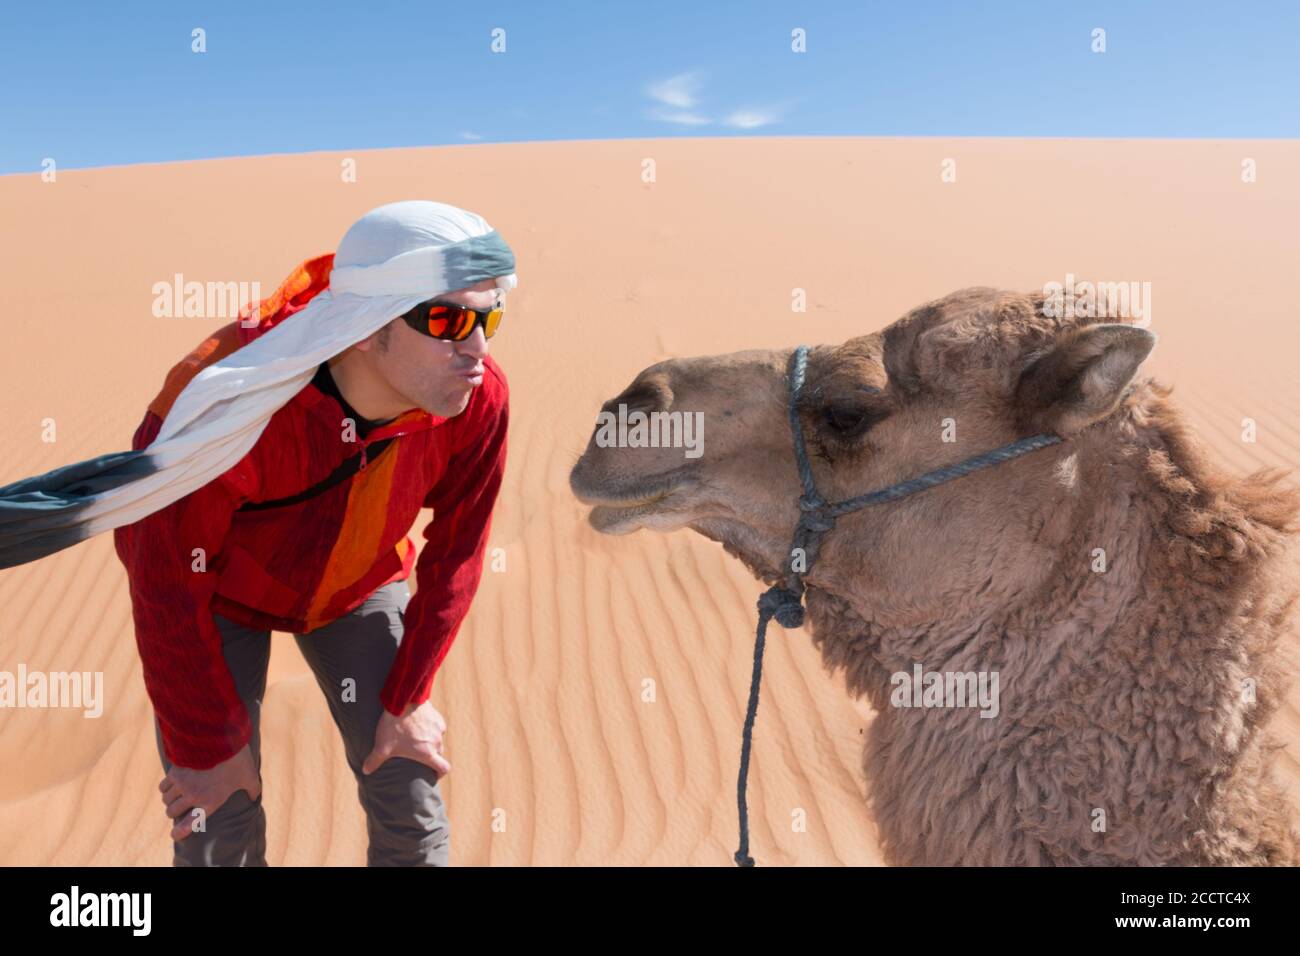 Tourist with turban and sunglasses kissing a camel in the desert dunes. Funny concept Stock Photo